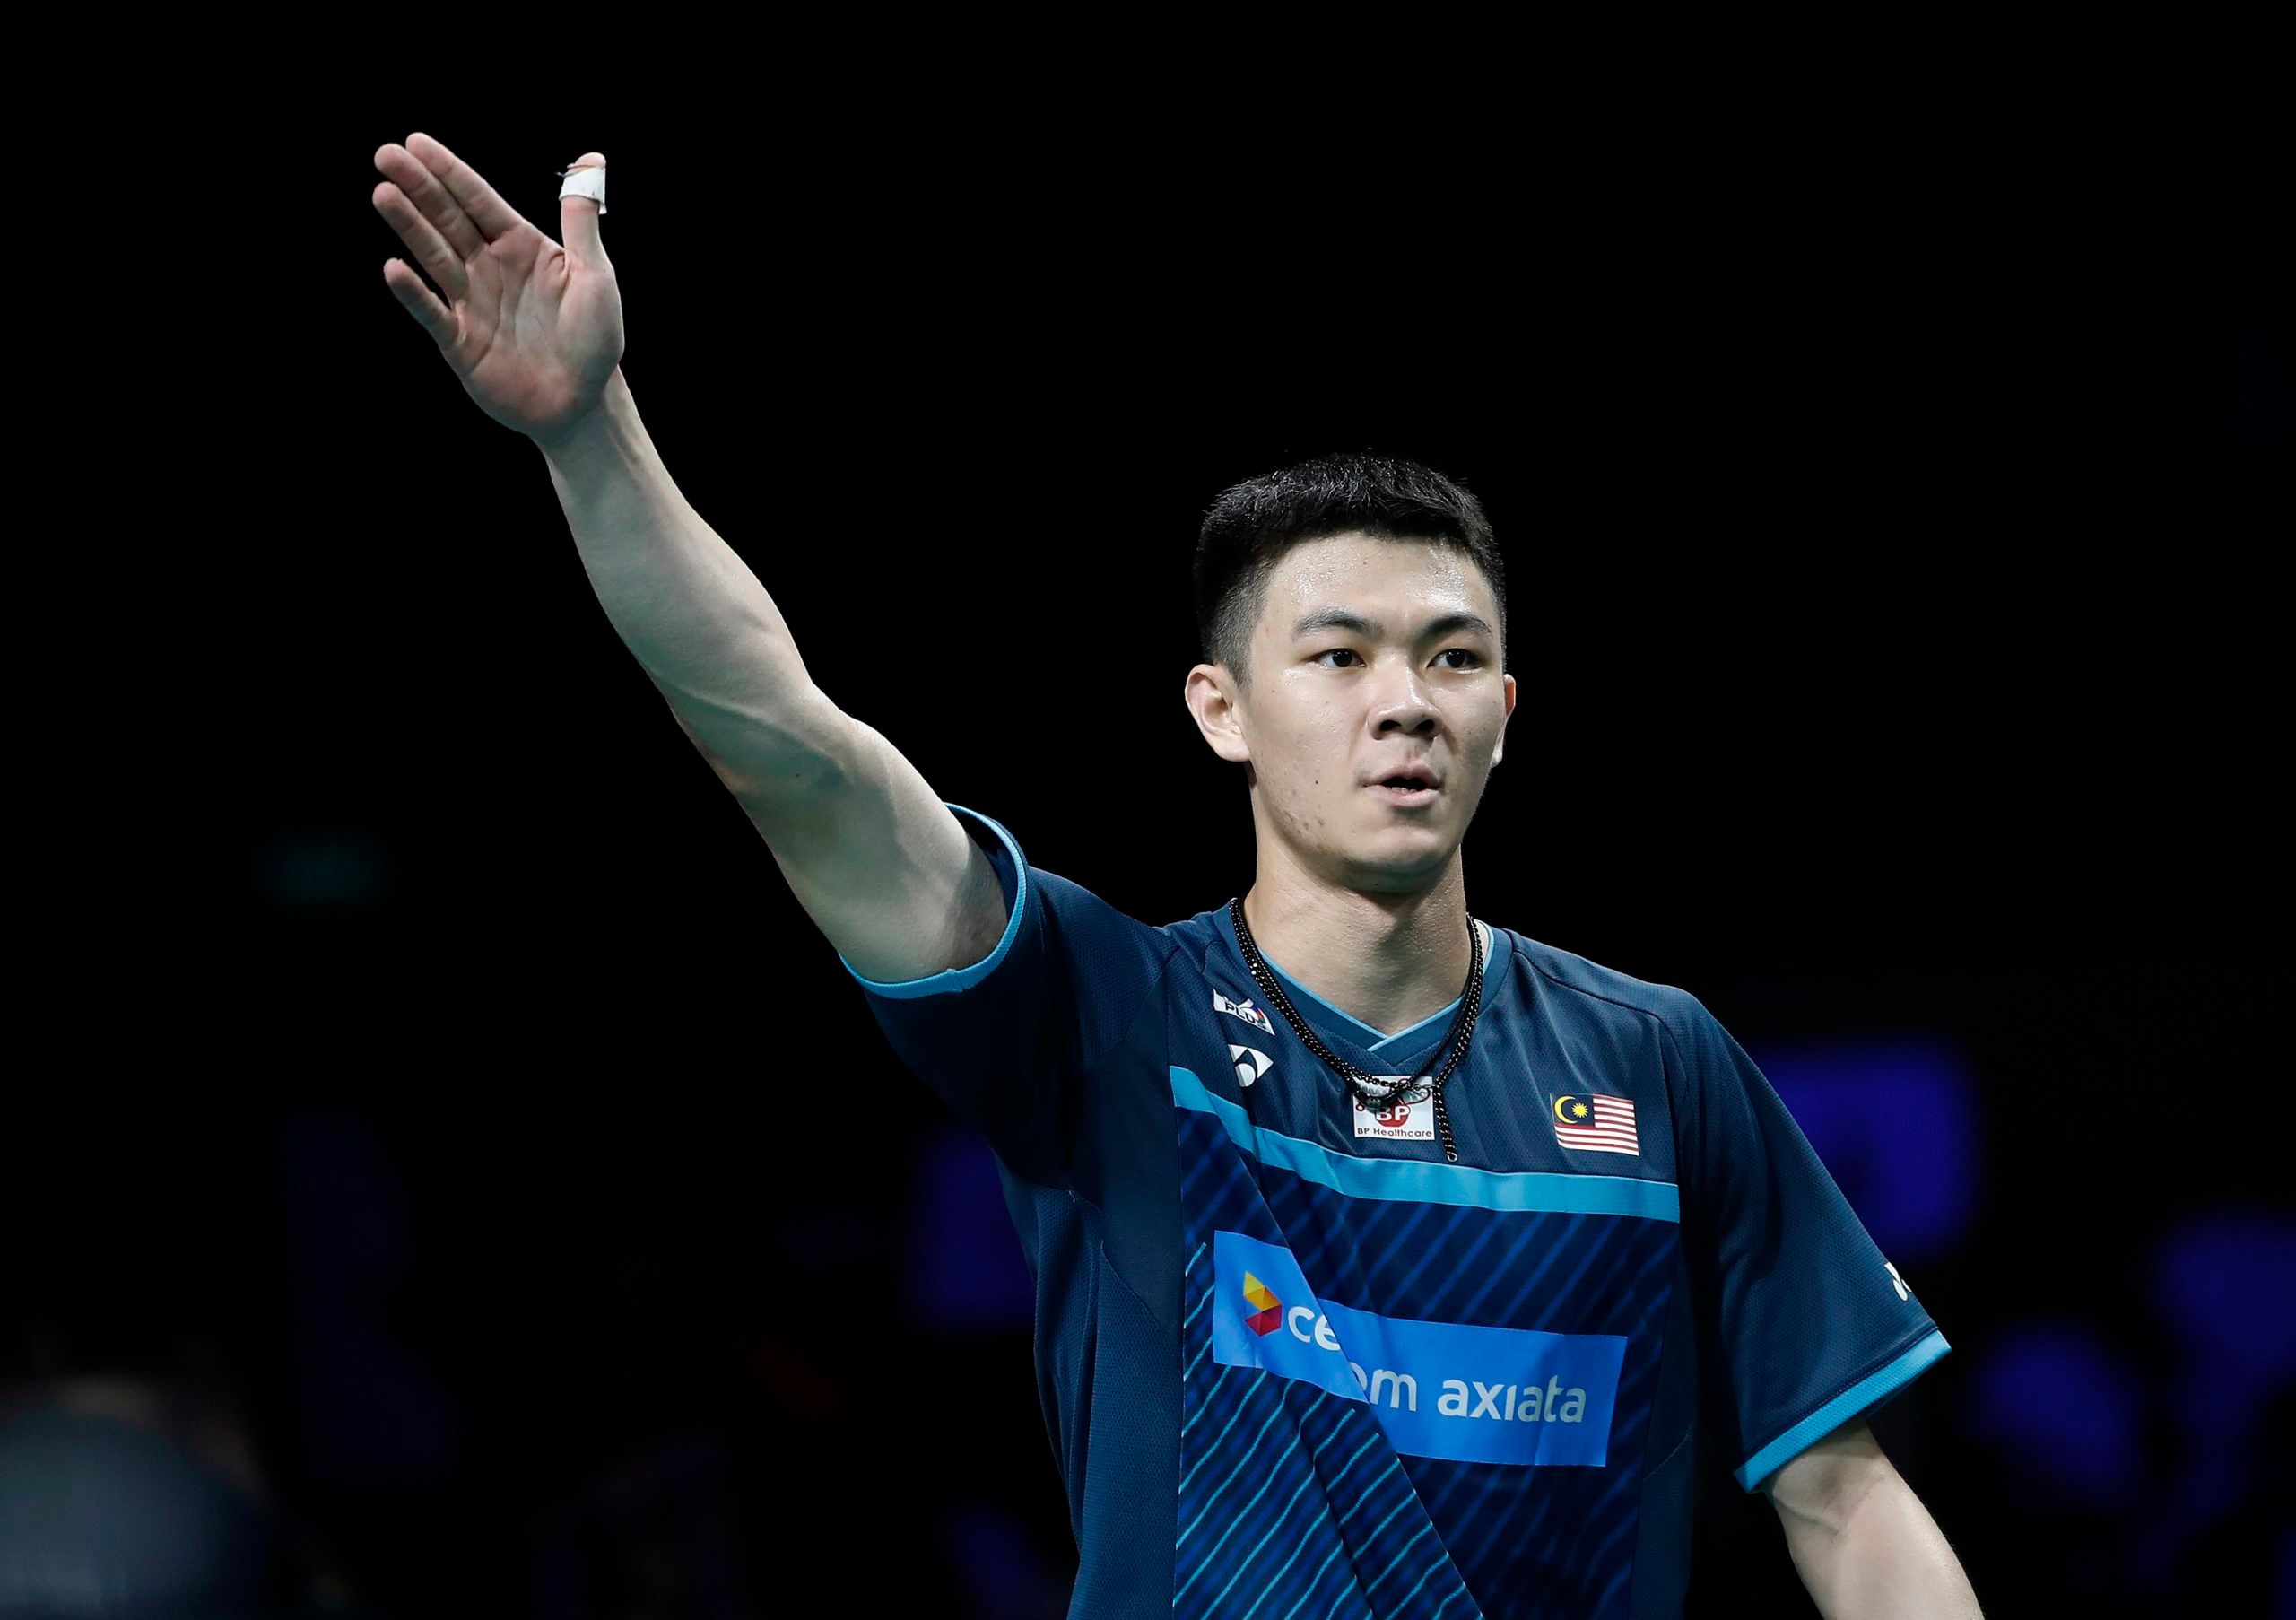 All updates on Malaysian badminton players at the 2022 German Open